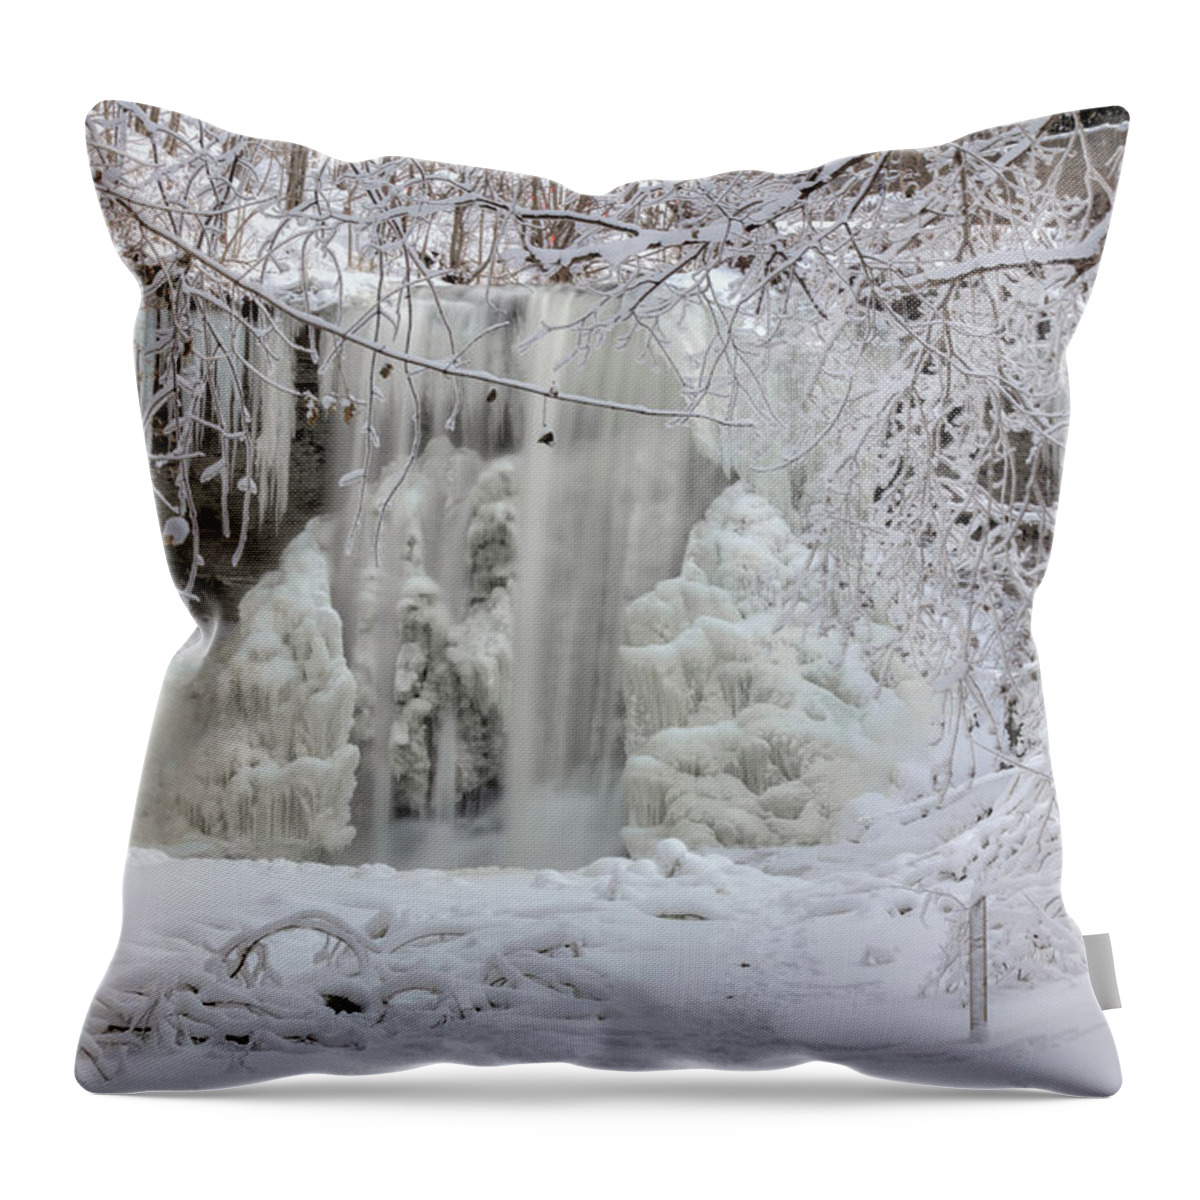 Waterfall Throw Pillow featuring the photograph Frozen by Rod Best